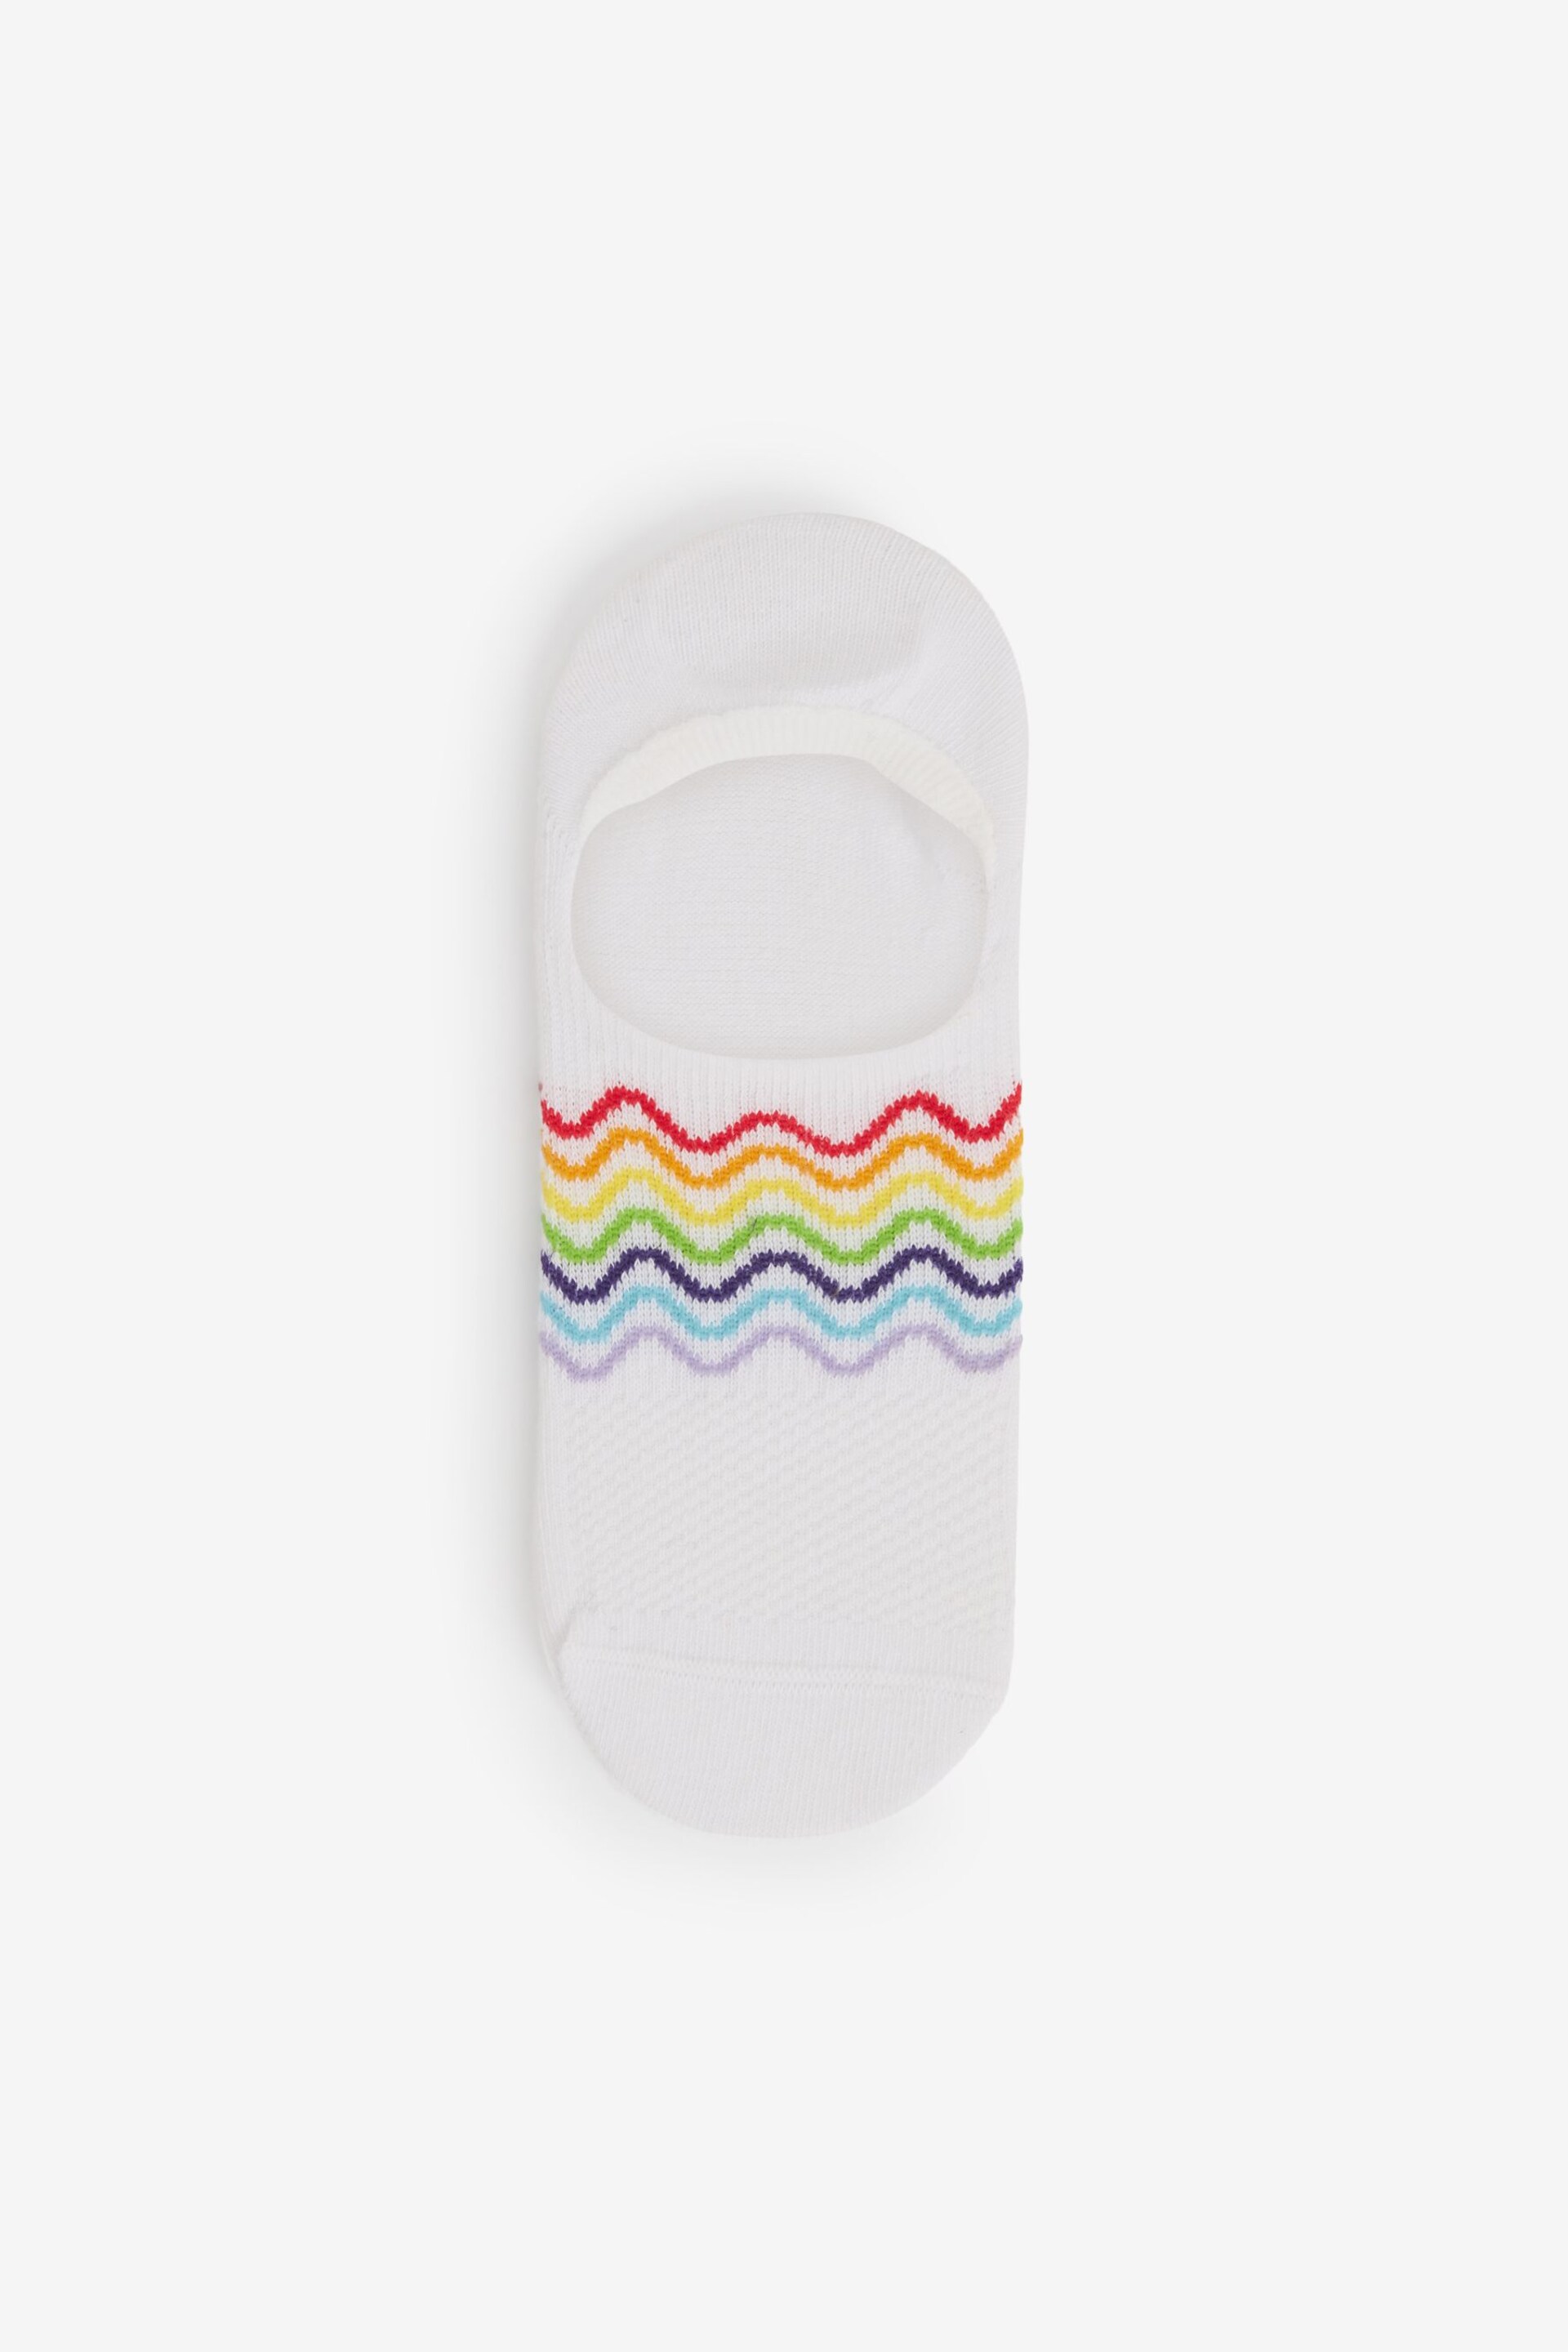 White/Rainbow High Cut Invisible Trainer Socks 4 Pack - Image 3 of 5